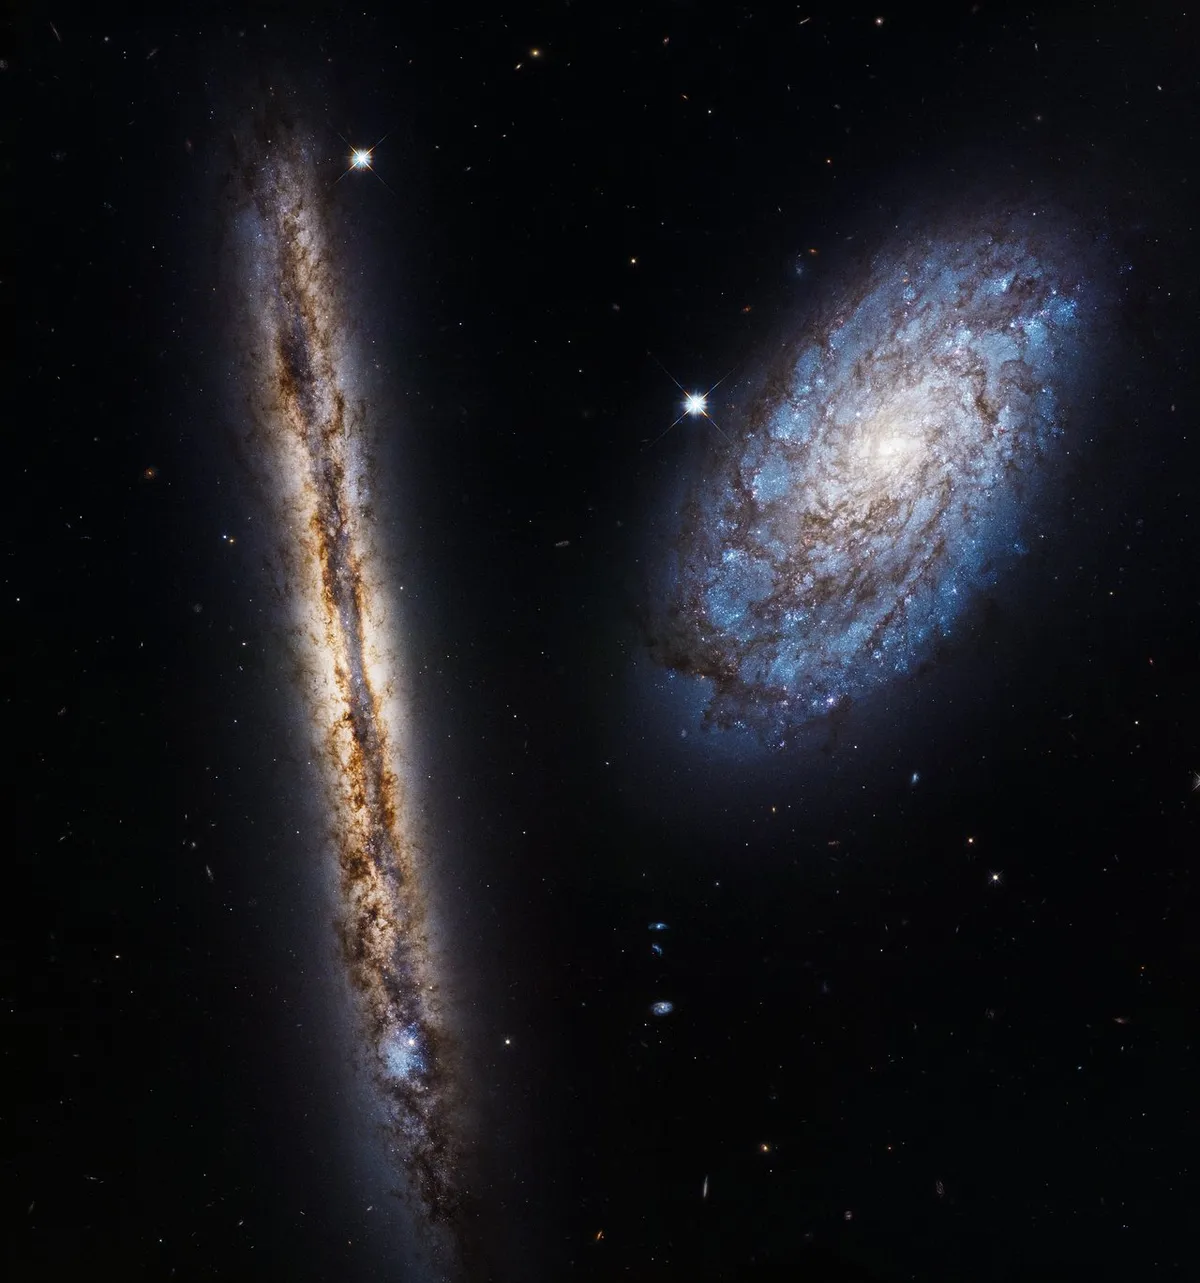 The difference perspective can make! Galaxy NGC 4302 appears edge-on while galaxy NGC 4298 appears face-on, from our perspective on Earth. Both galaxies are 55 million lightyears away. Credit: ESA/NASA Hubble